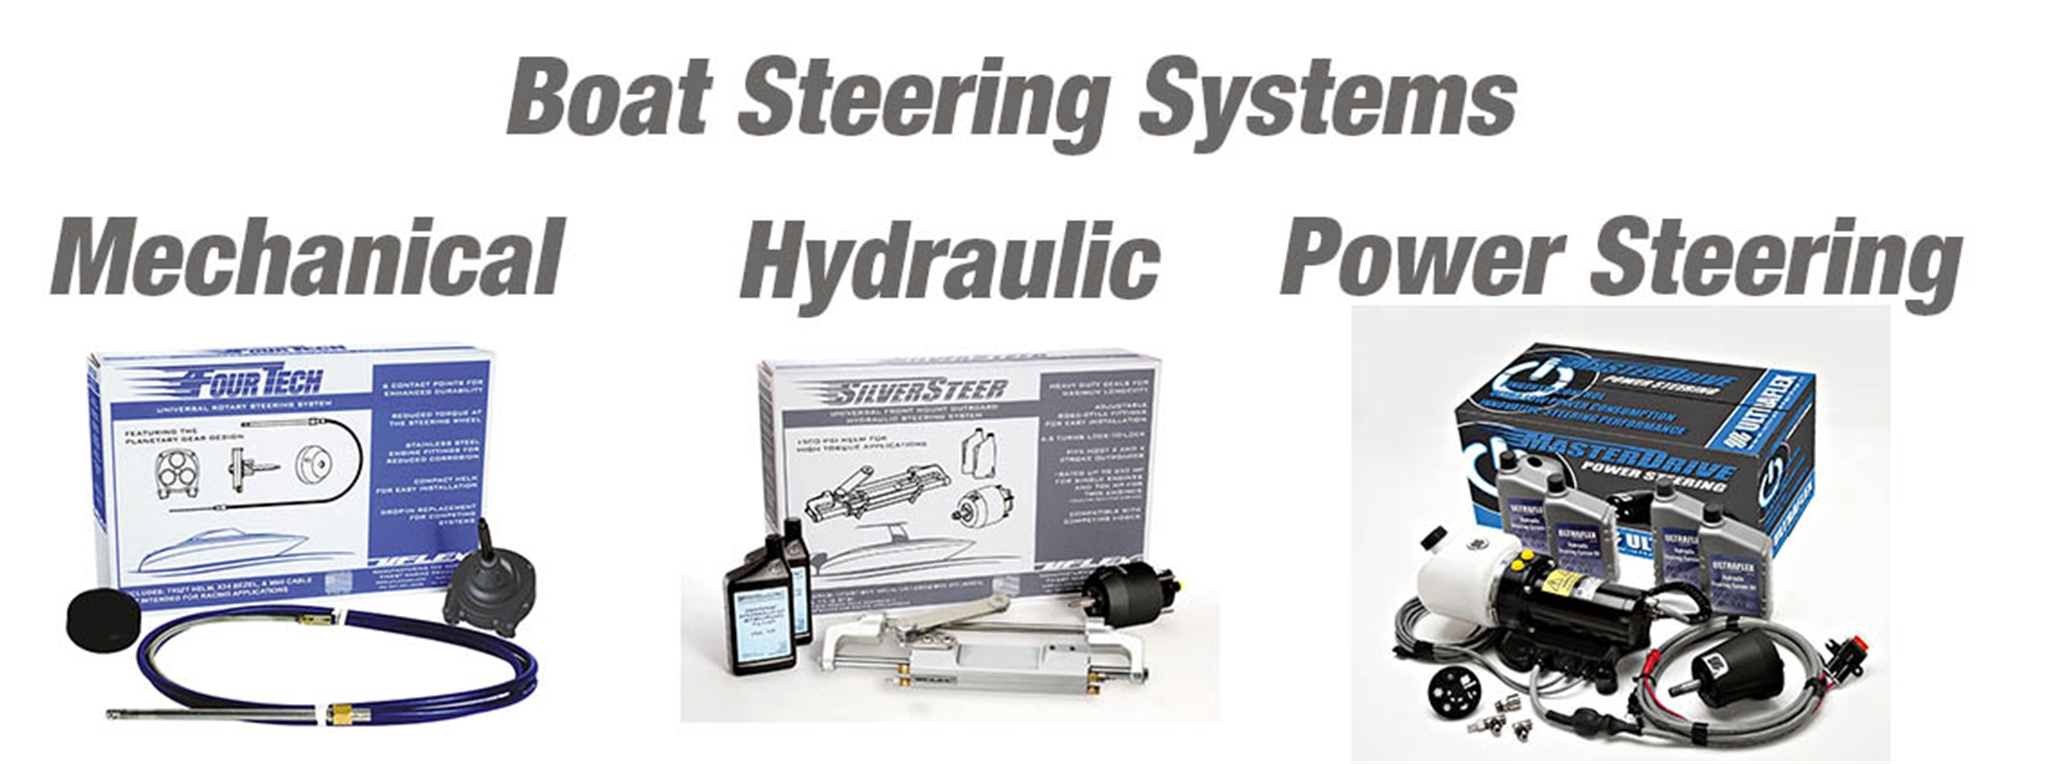 Boat Steering Systems including Mechanical boat steering Hydraulic Boat Steering and Hydrauli Power Assisted Boat Steering